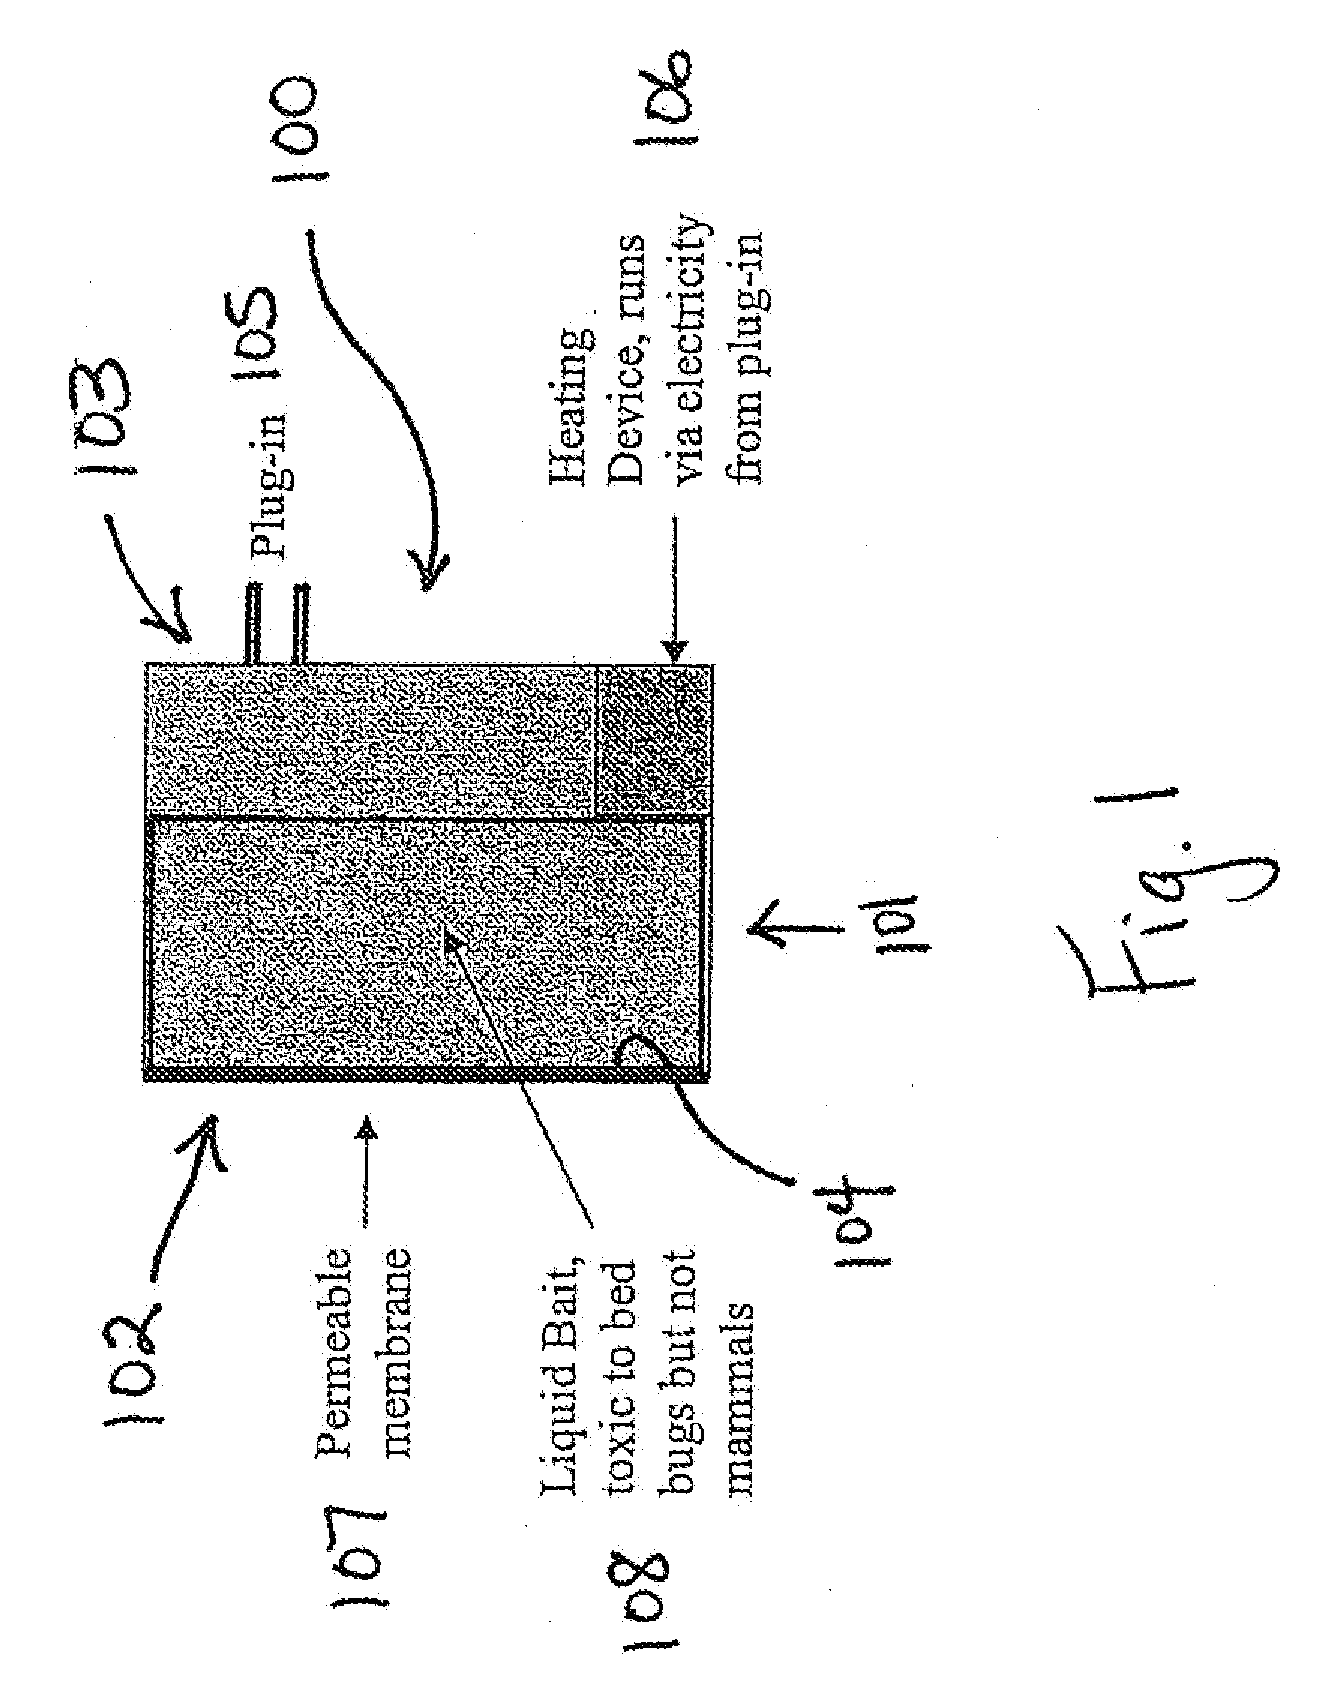 Insect bait station and method of using